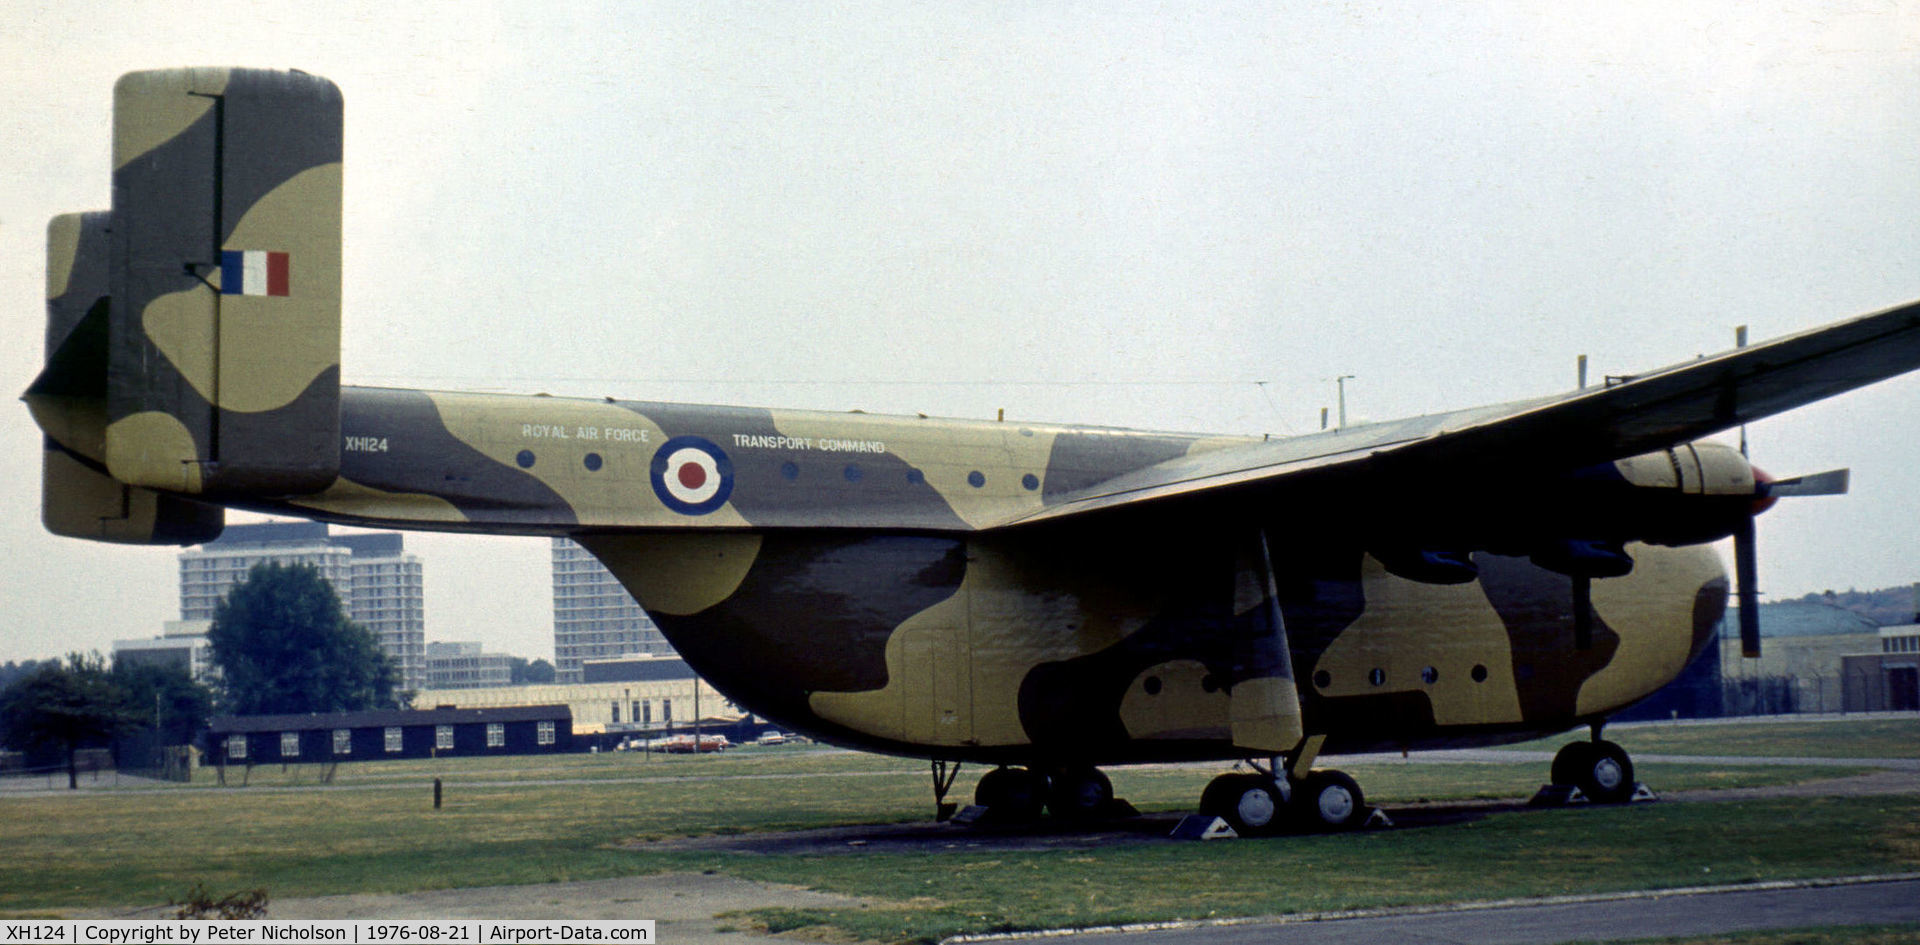 XH124, 1957 Blackburn Beverley C.1 C/N 1030, Another view of this Beverley C.1 as displayed at the Royal Air Force Museum at Hendon in the Summer of 1976.